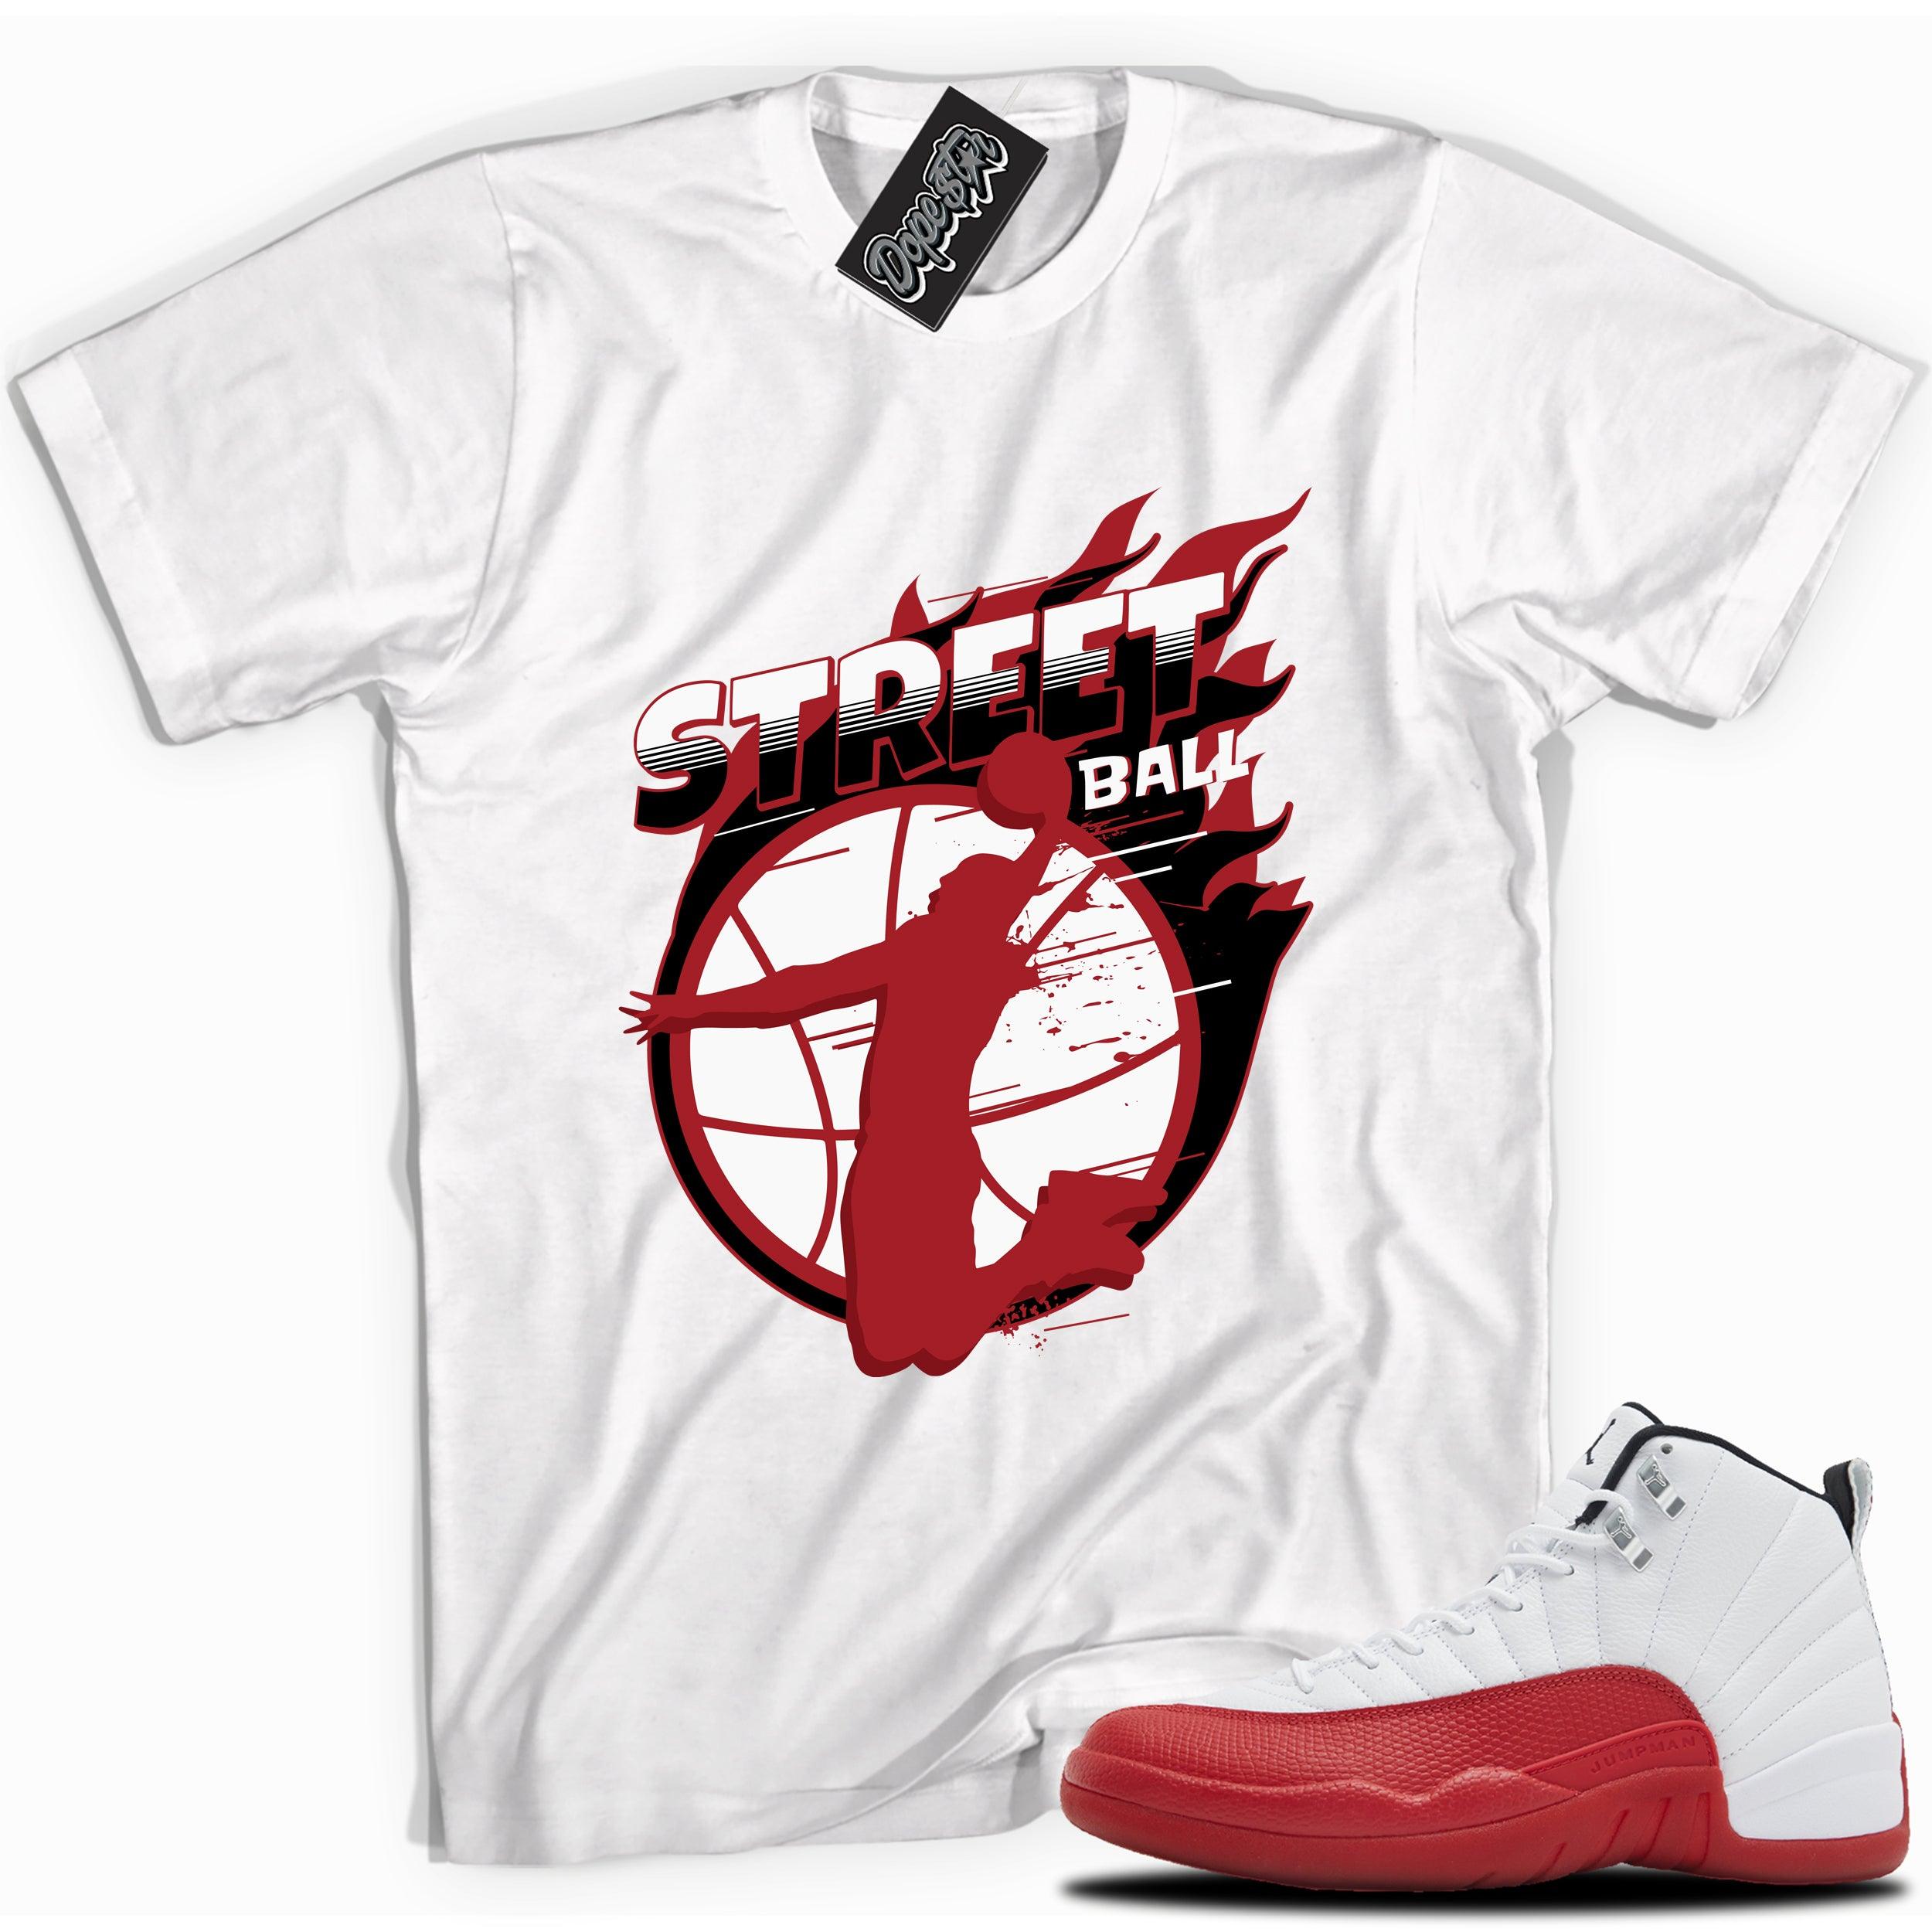 Cool White graphic tee with “Street Ball” print, that perfectly matches Air Jordan 12 Retro Cherry Red 2023 red and white sneakers 